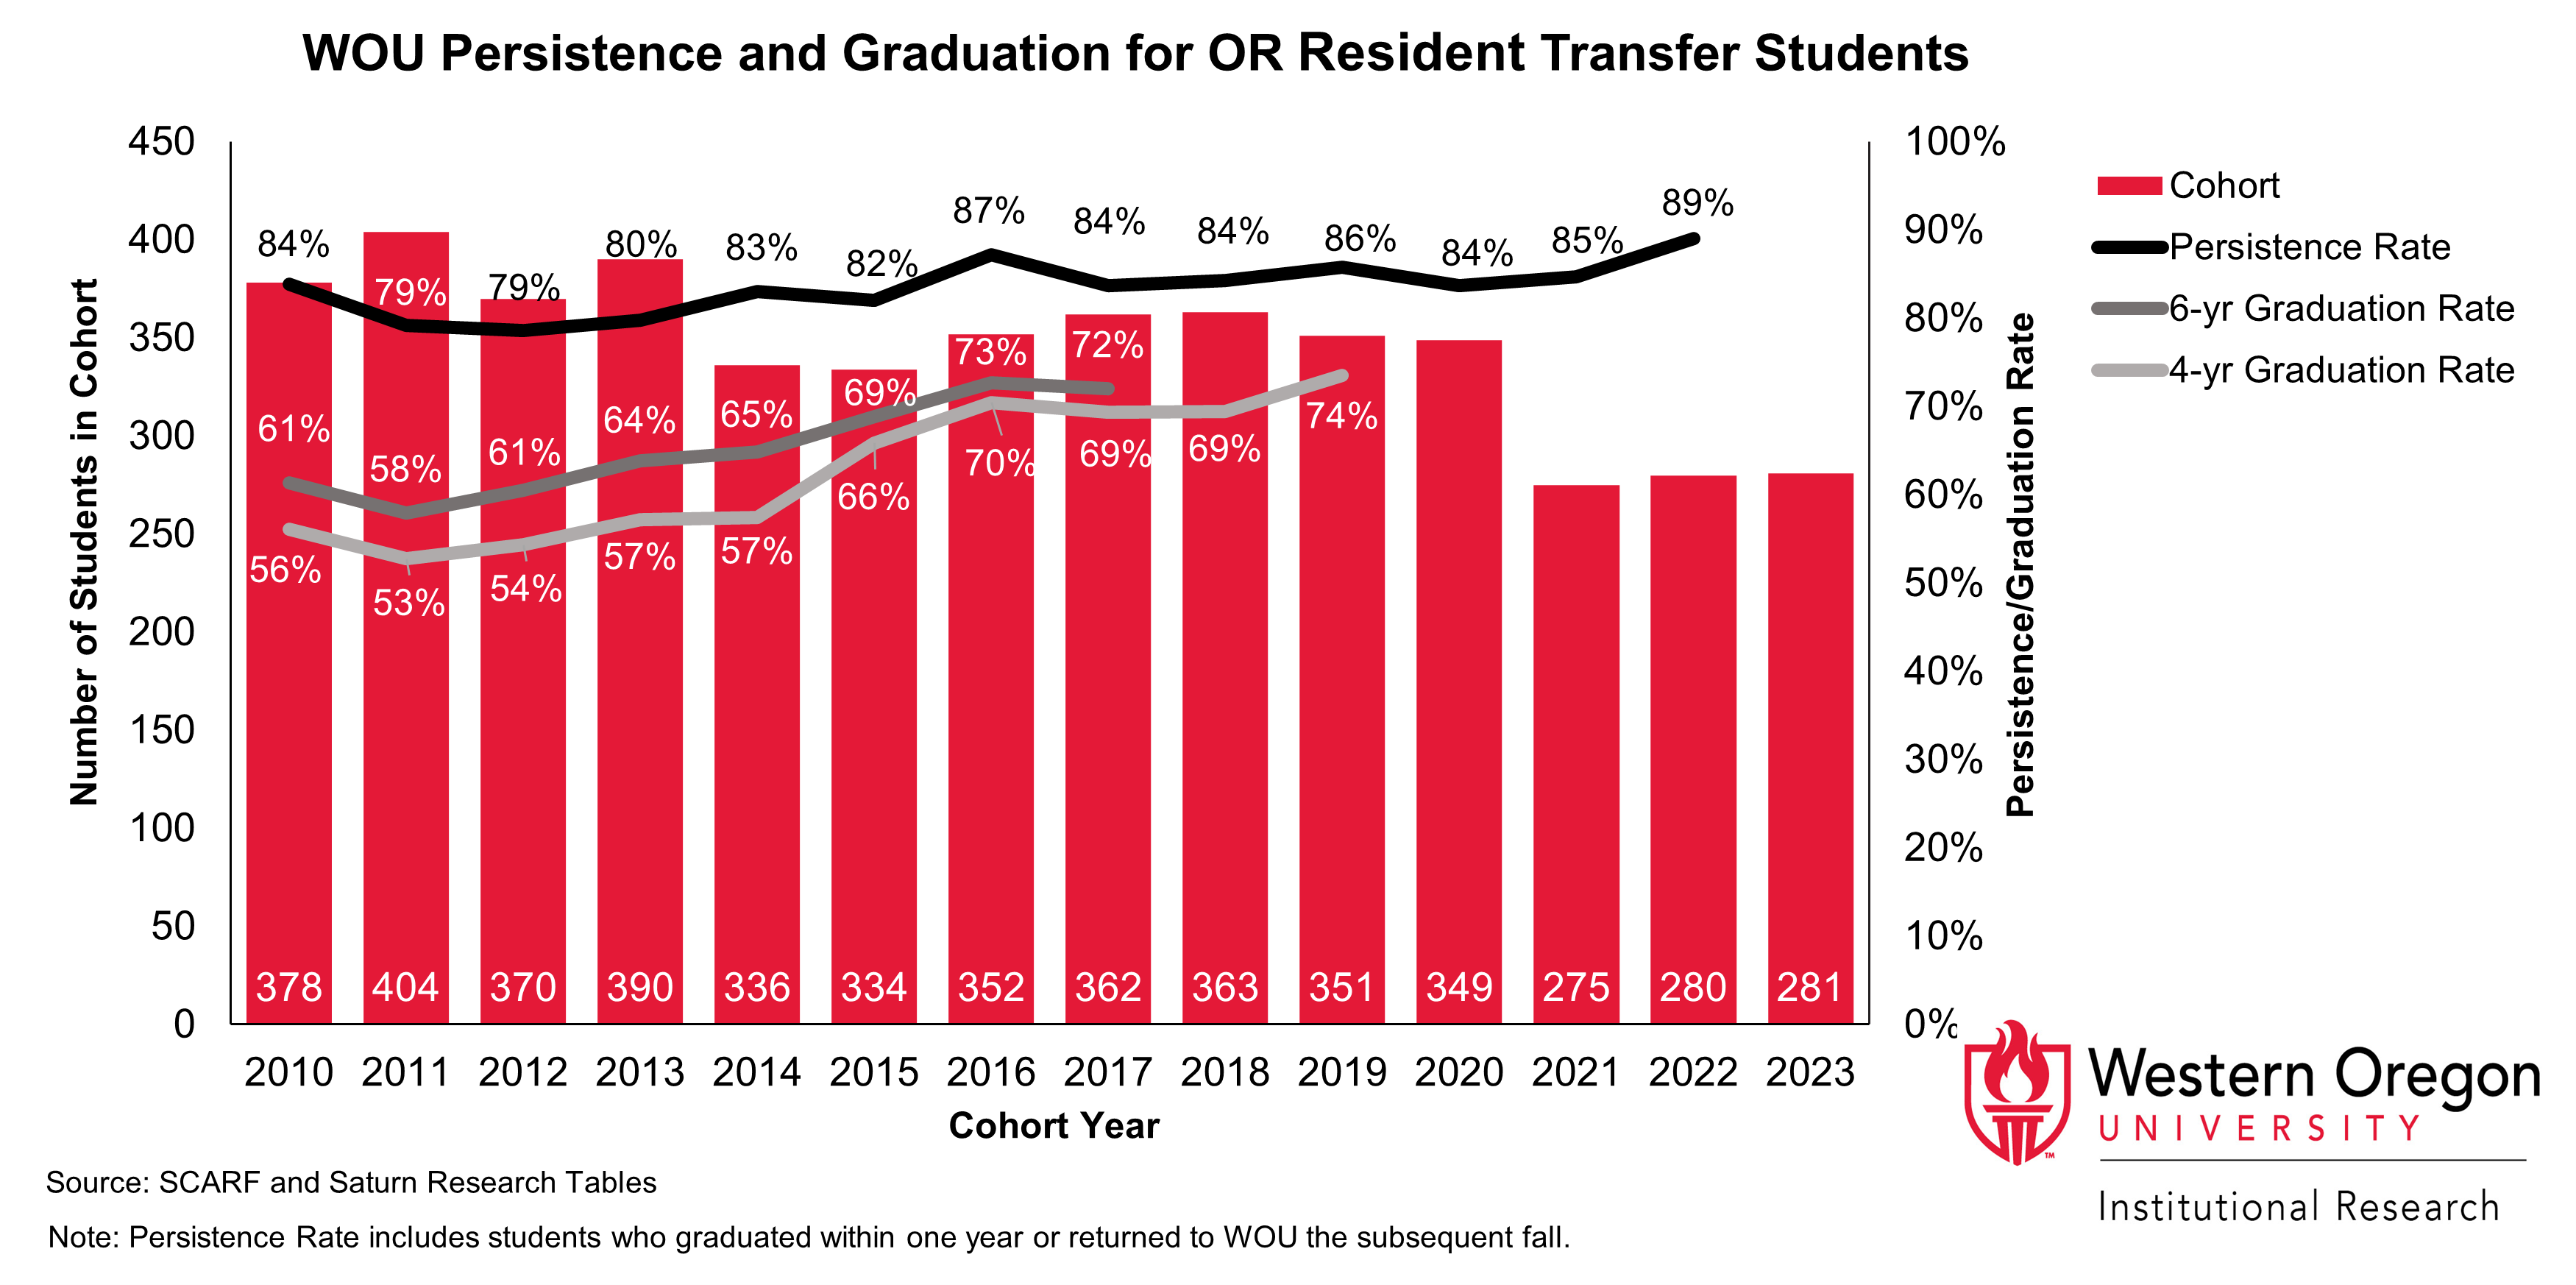 Bar and line graph of retention and 4- and 6-year graduation rates since 2010 for WOU transfer students that are Oregon residents, showing that graduation and retention rates have increased overall.